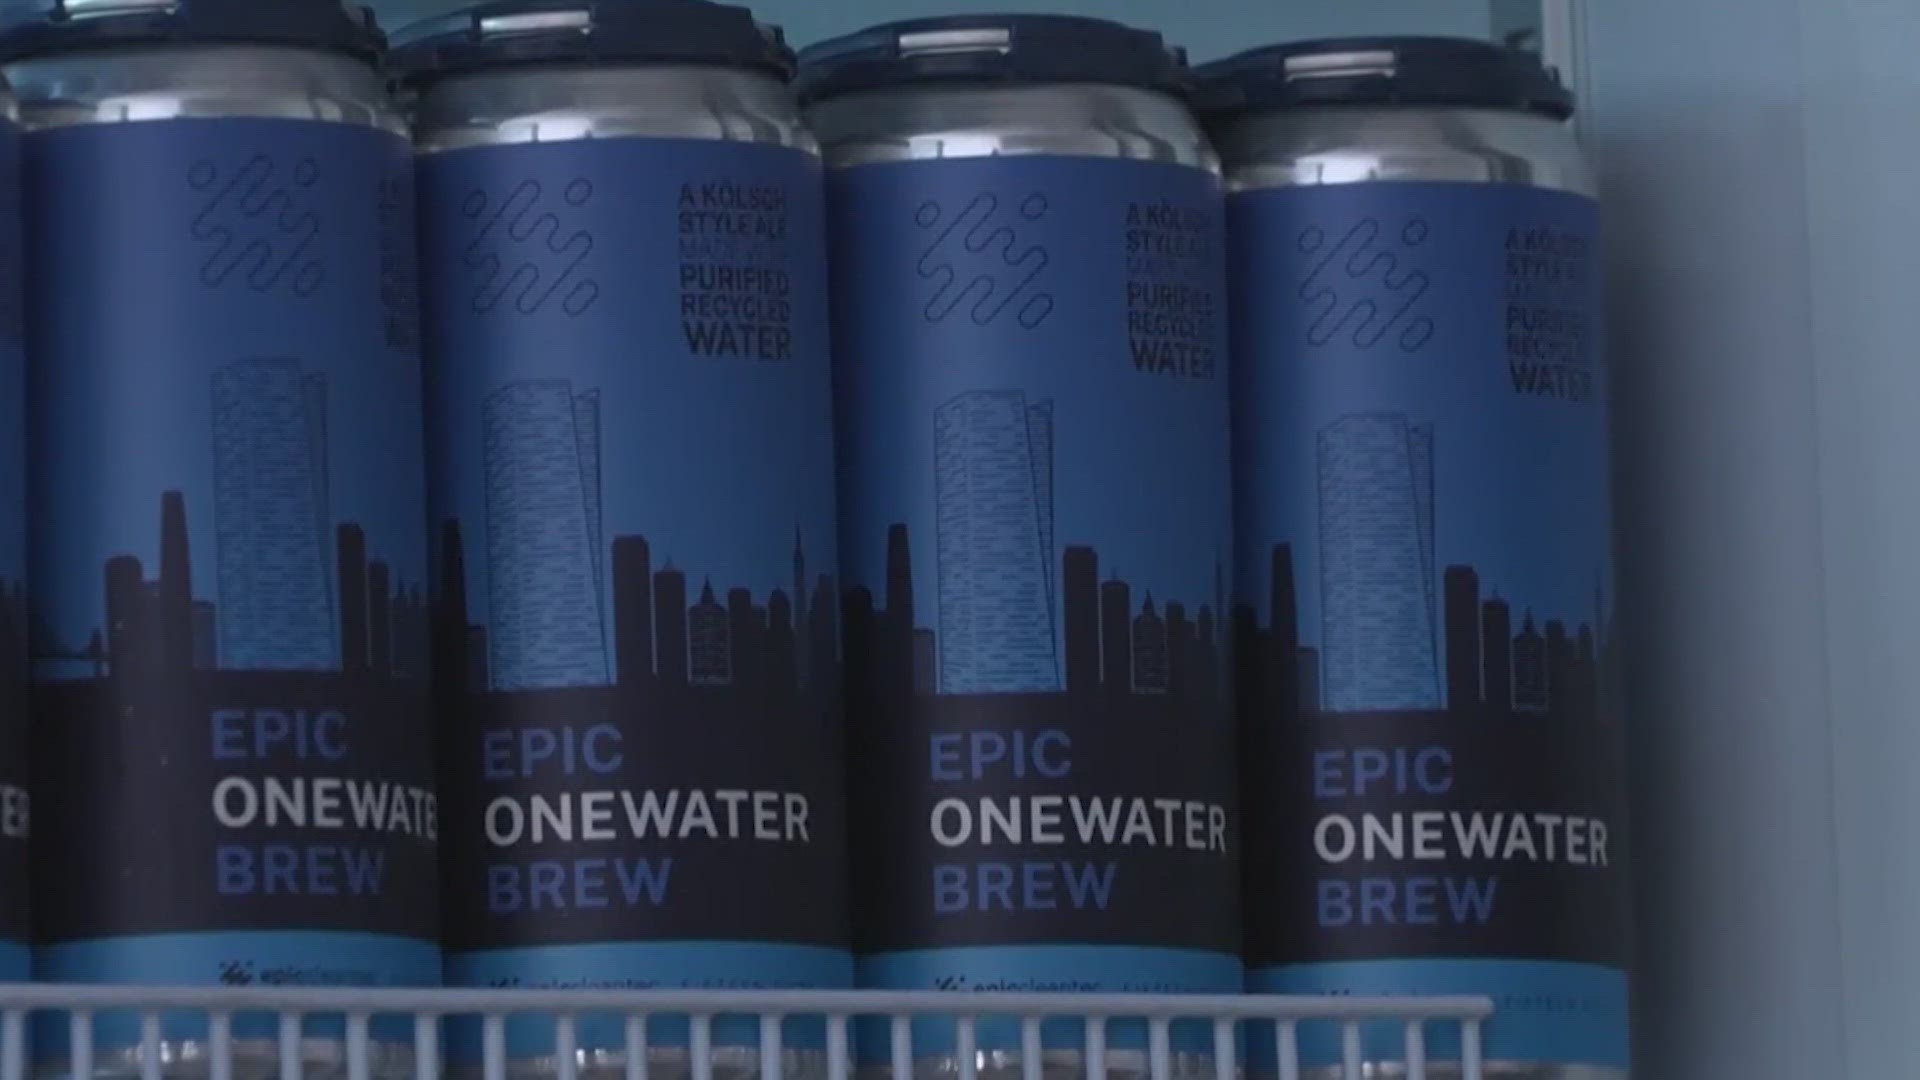 A northern California brewery and a water technology company have found a unique way to make a statement about recycling water.